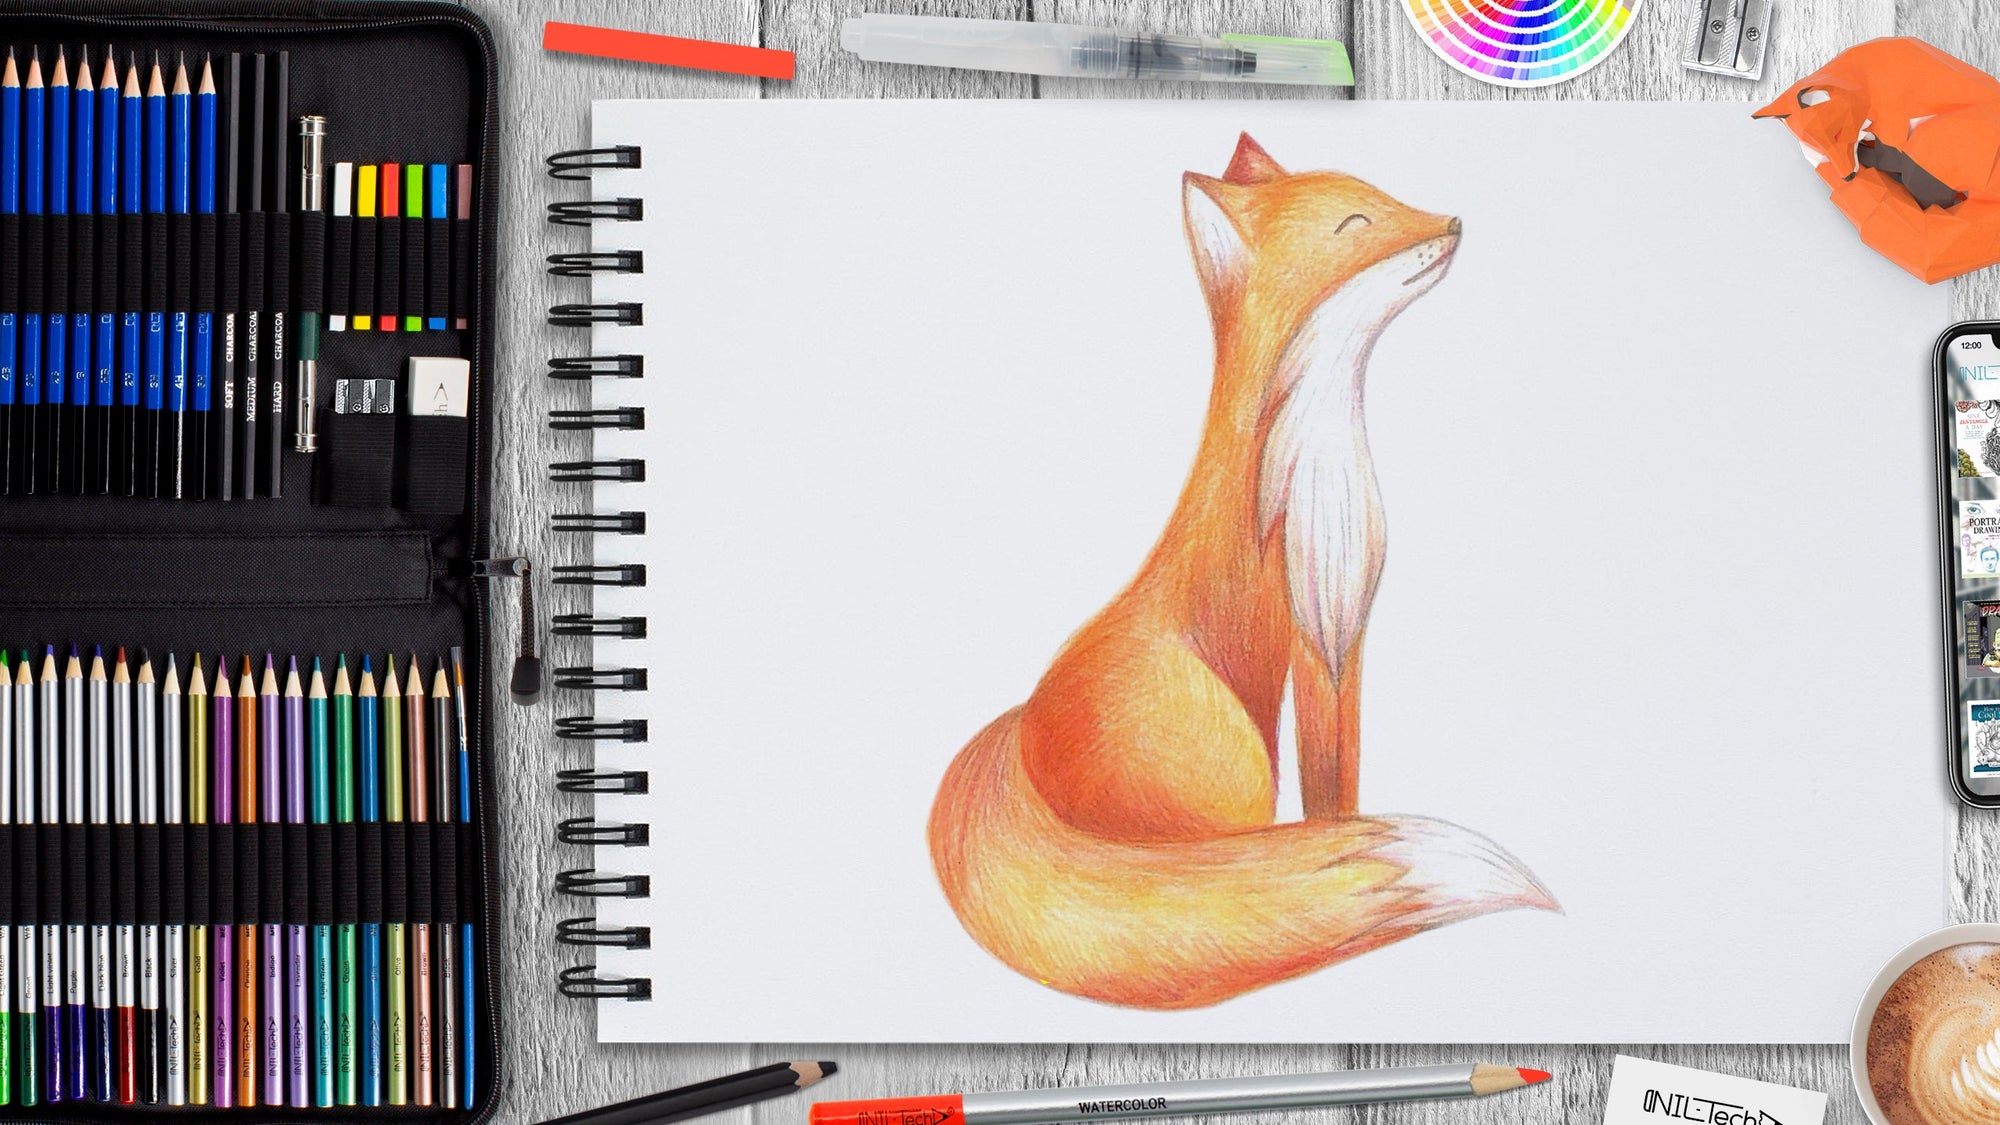 ARTIST DRAWING Pad: Mischievous Fox Drawing Pad, 108 Blank Pages, Extra  large (8.5 x 11) White paper, Sketch, Draw, Doodle, Paint and Write. -  Journal, Easy: 9781544041568 - AbeBooks